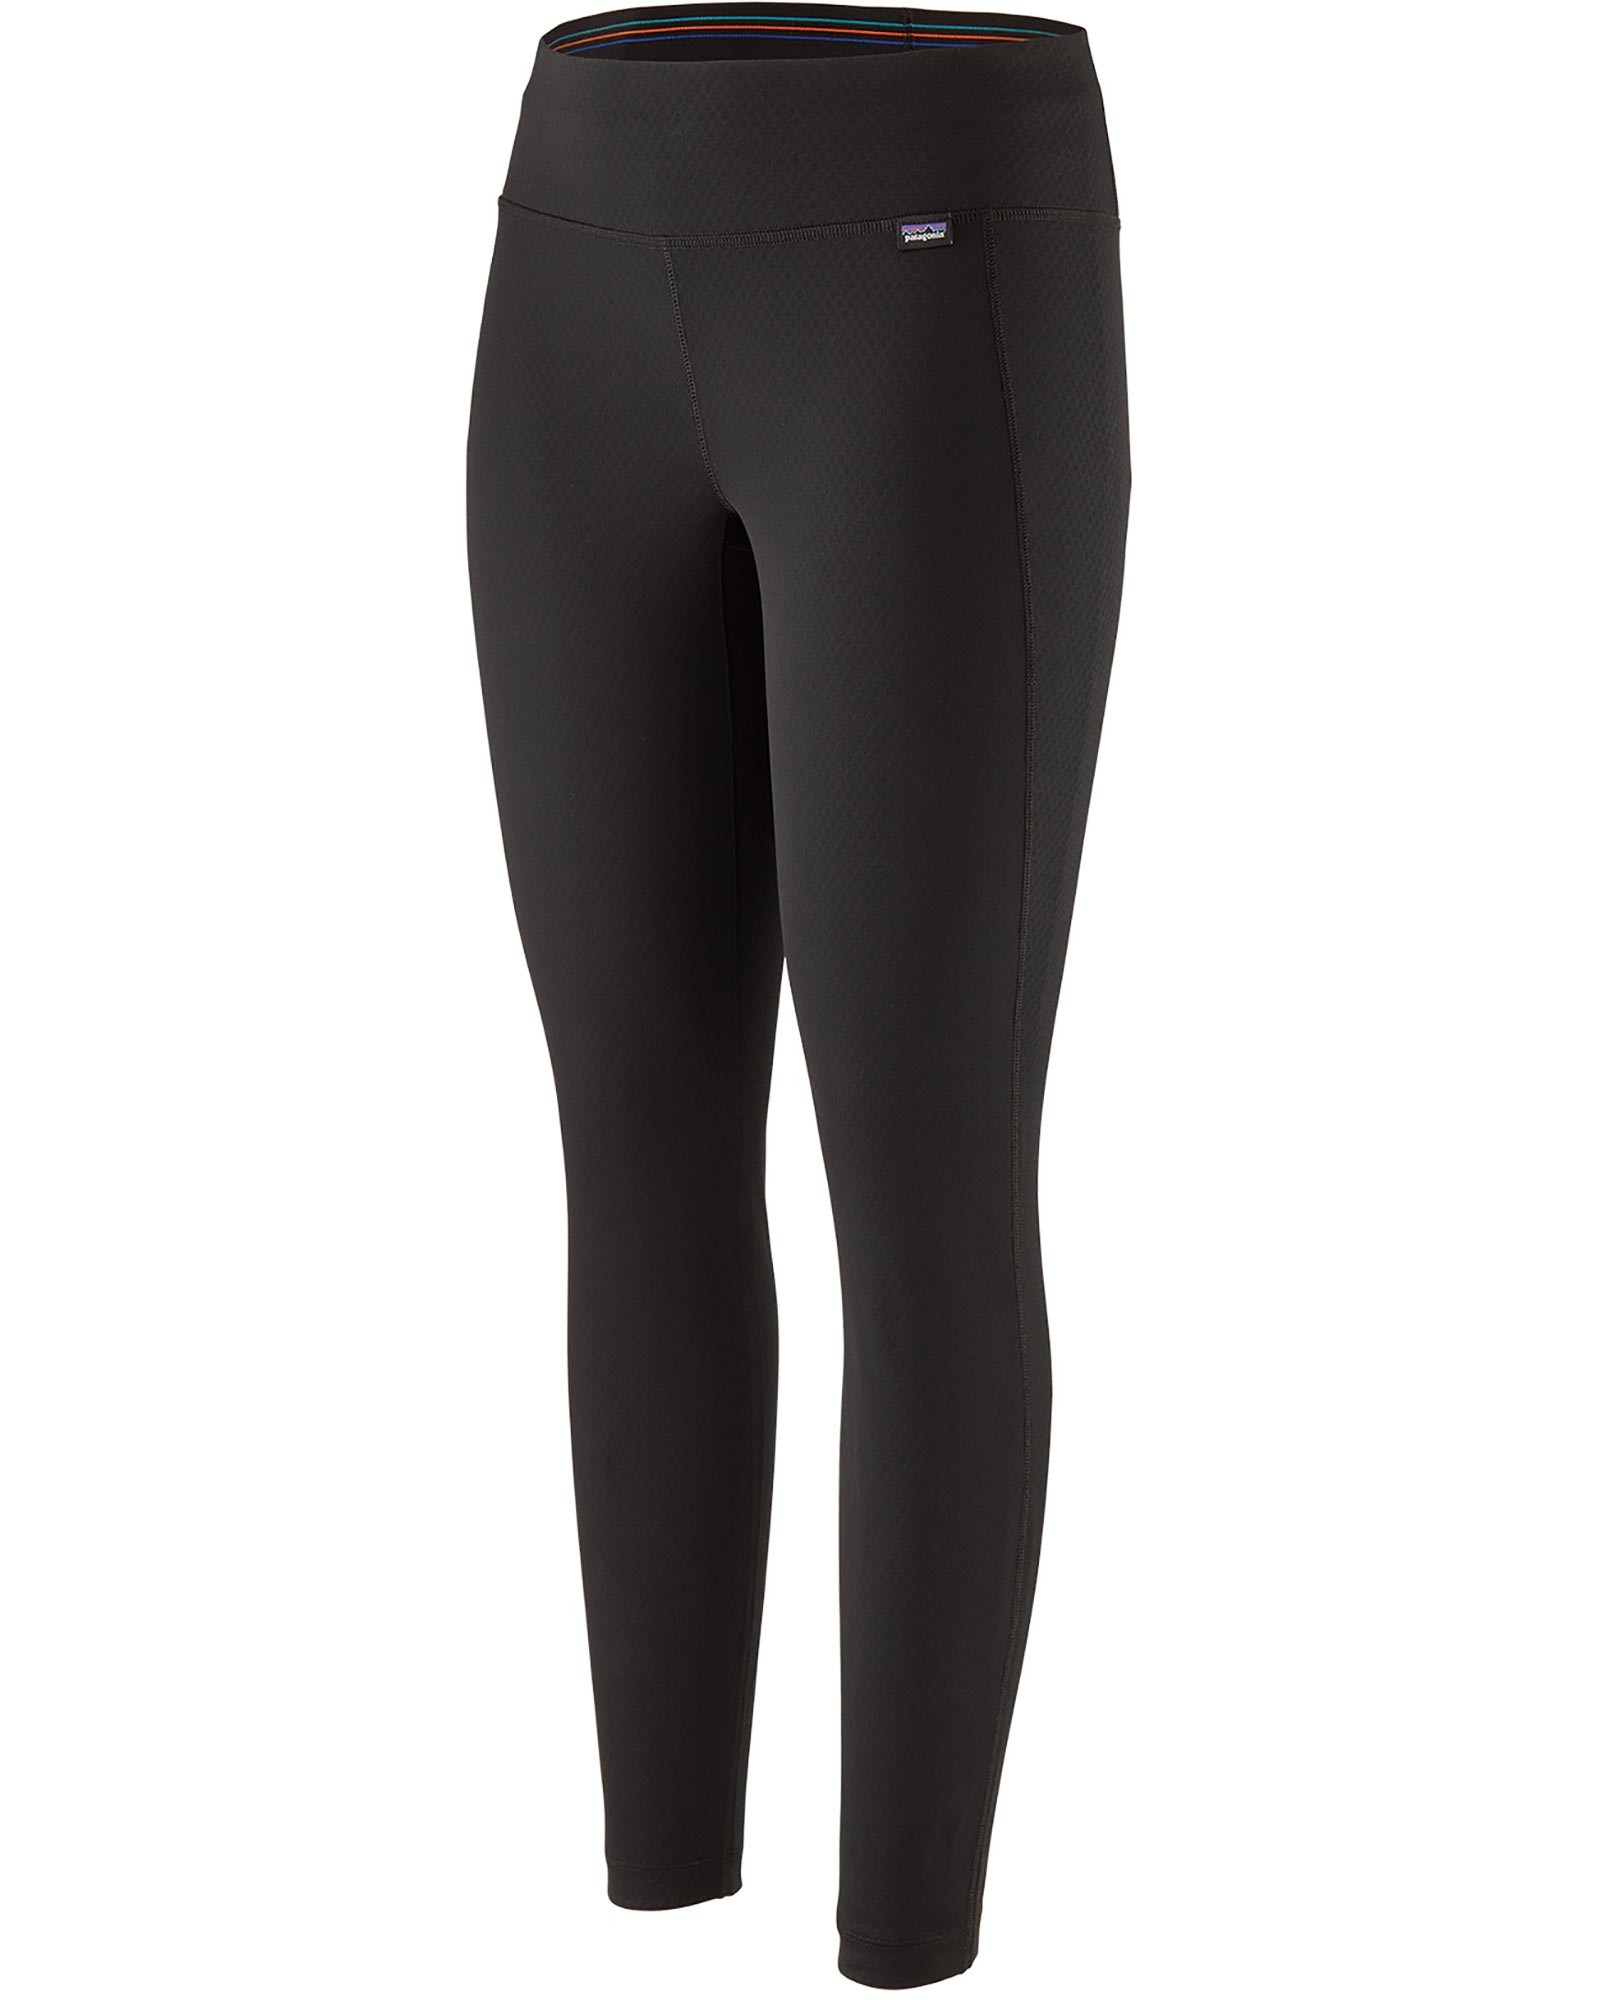 Patagonia Capilene Women’s Midweight Tights - black L